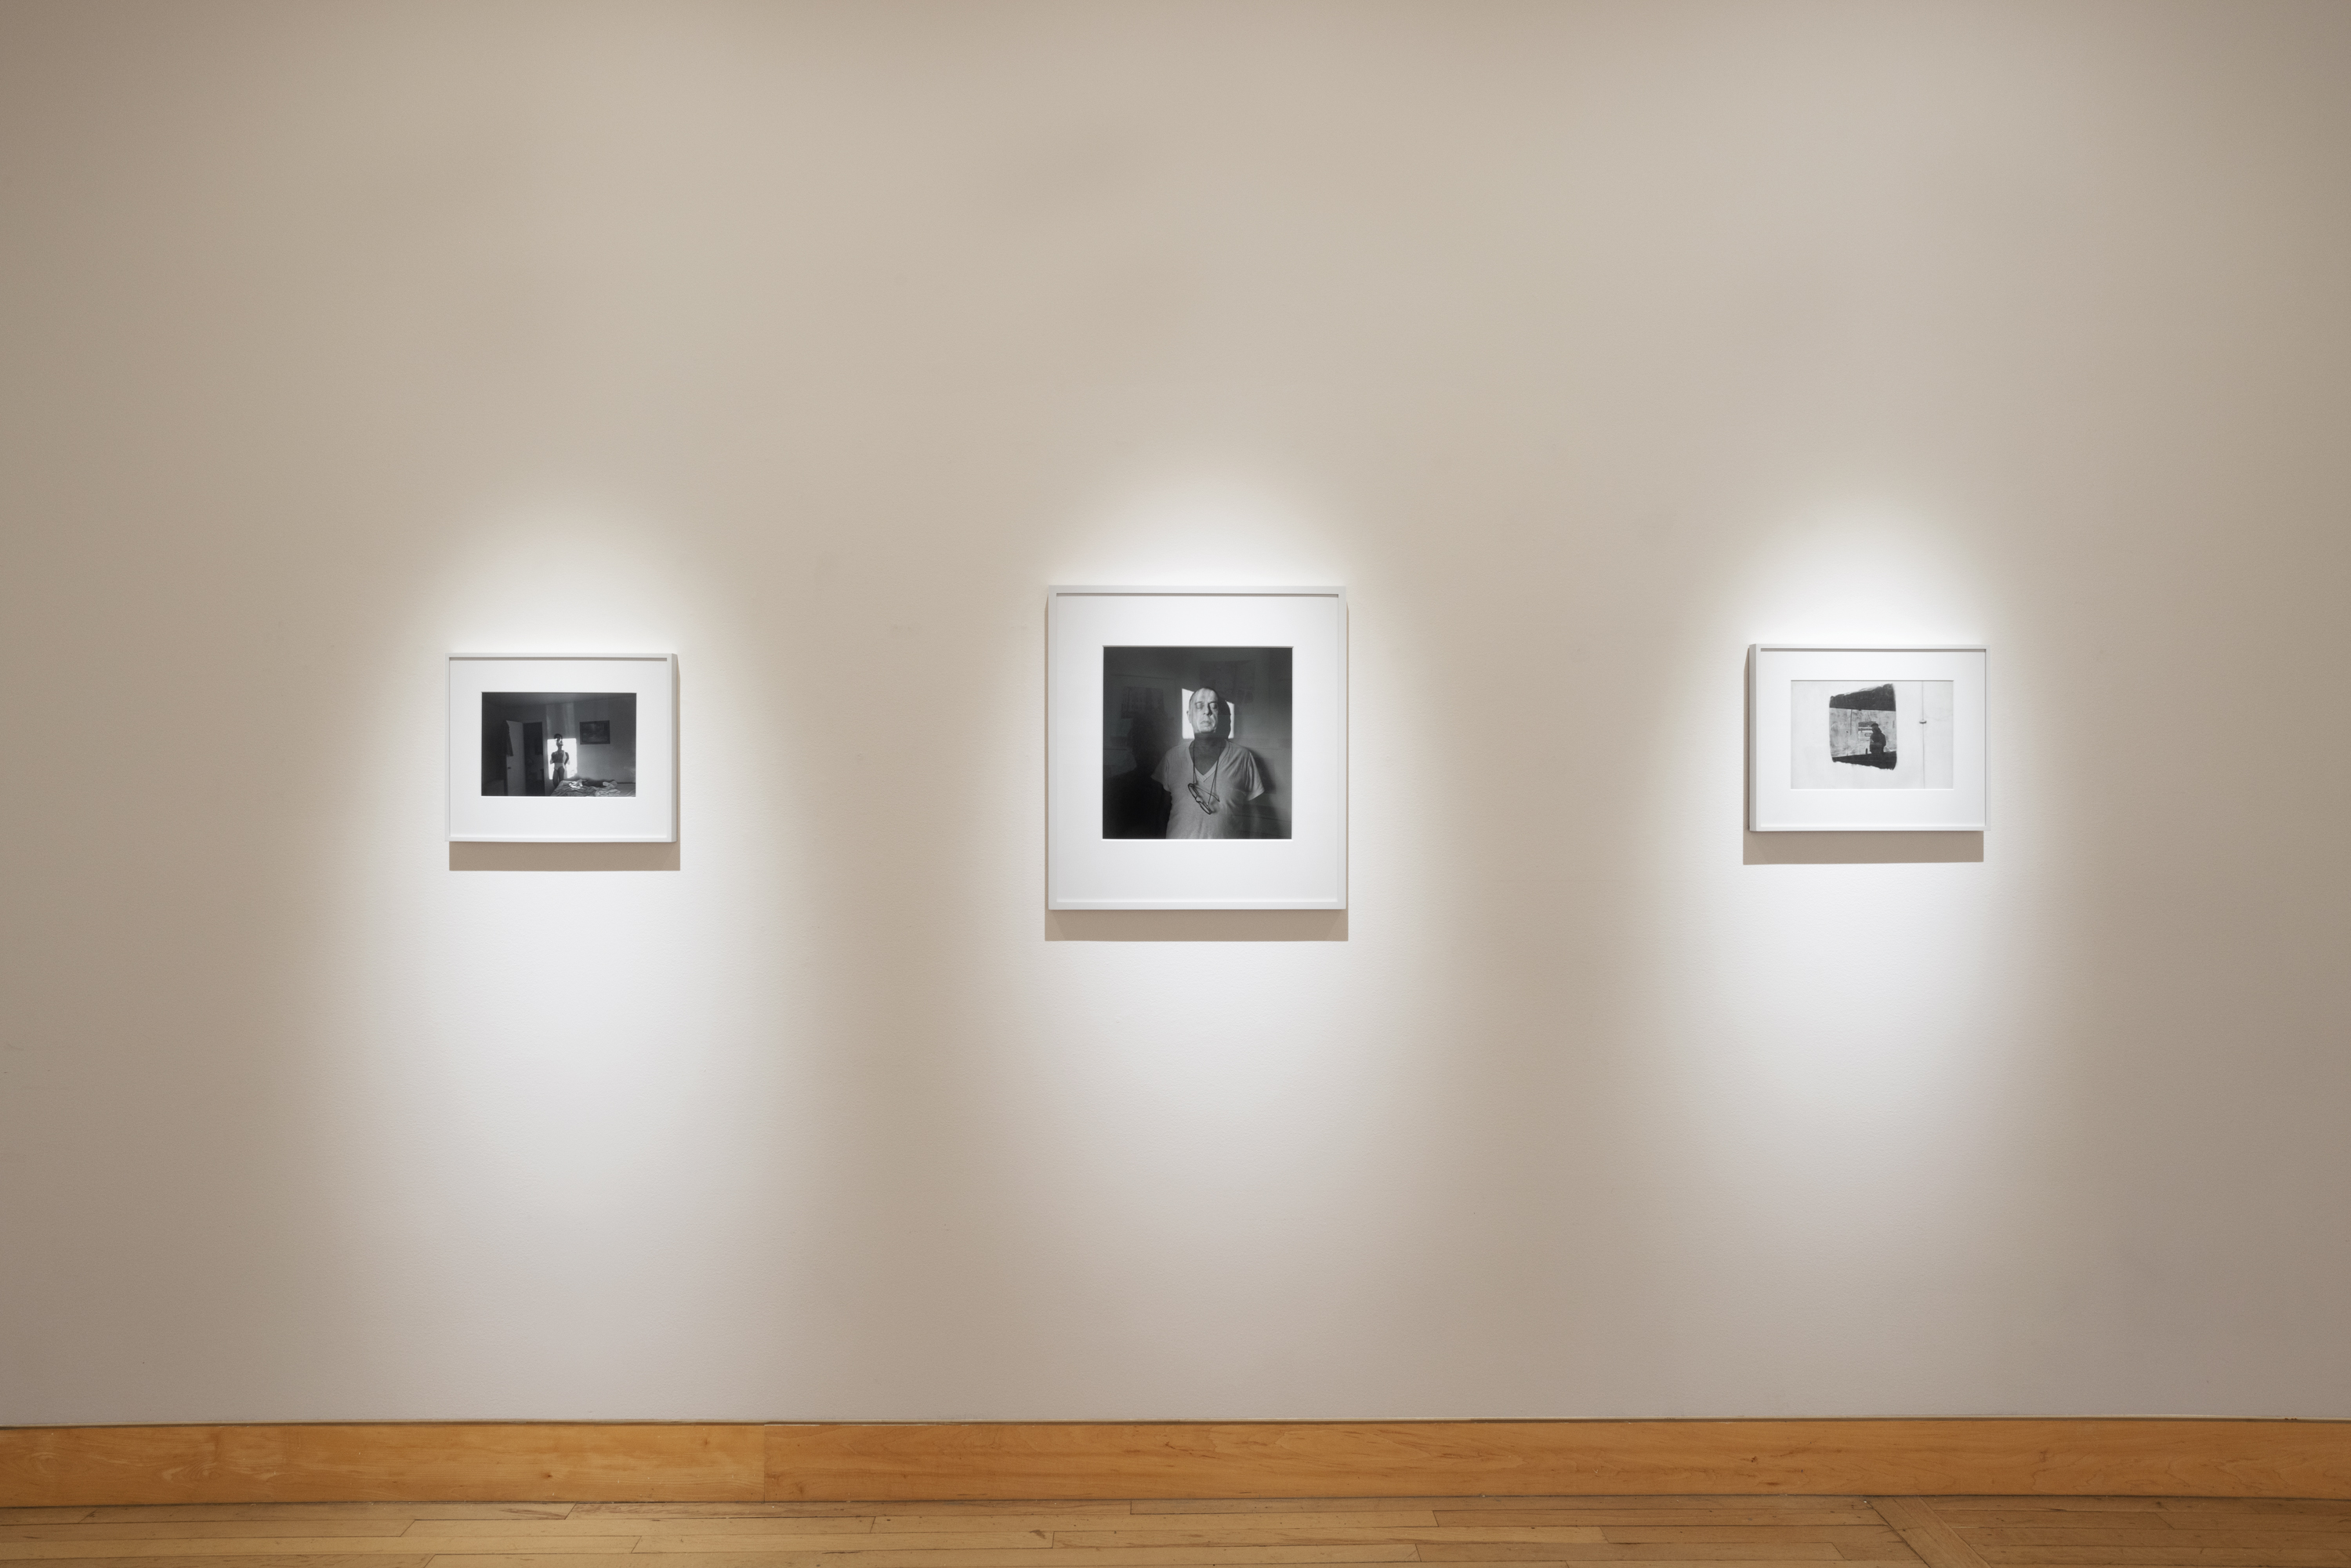 Color image of a gallery exhibiting black and white photographs of various sizes on white gallery wall